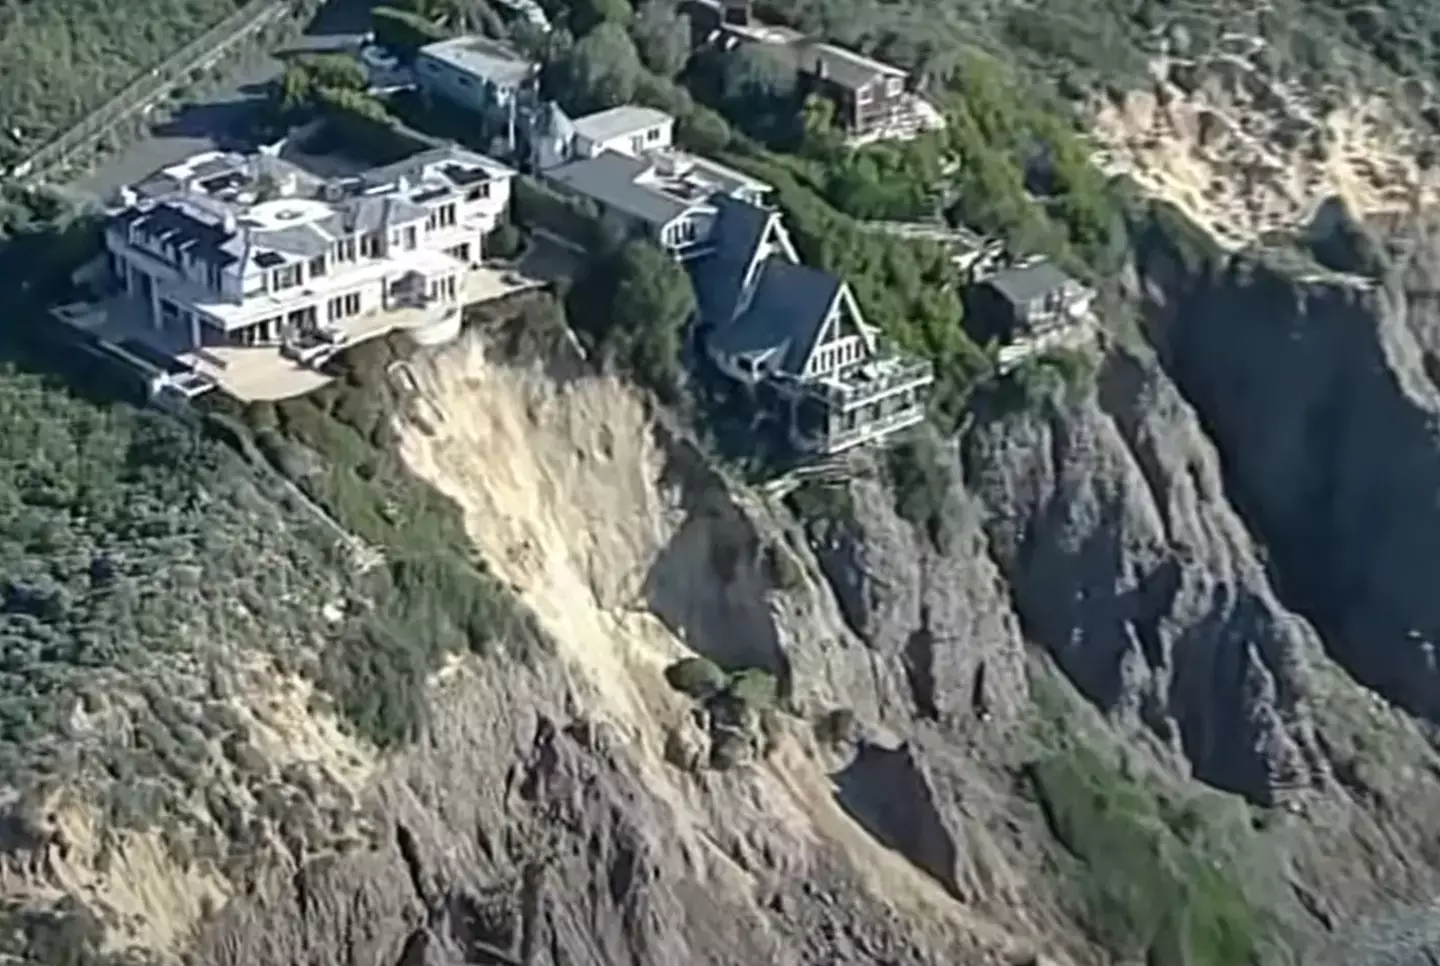 The houses can be seen close to the cliff edge.